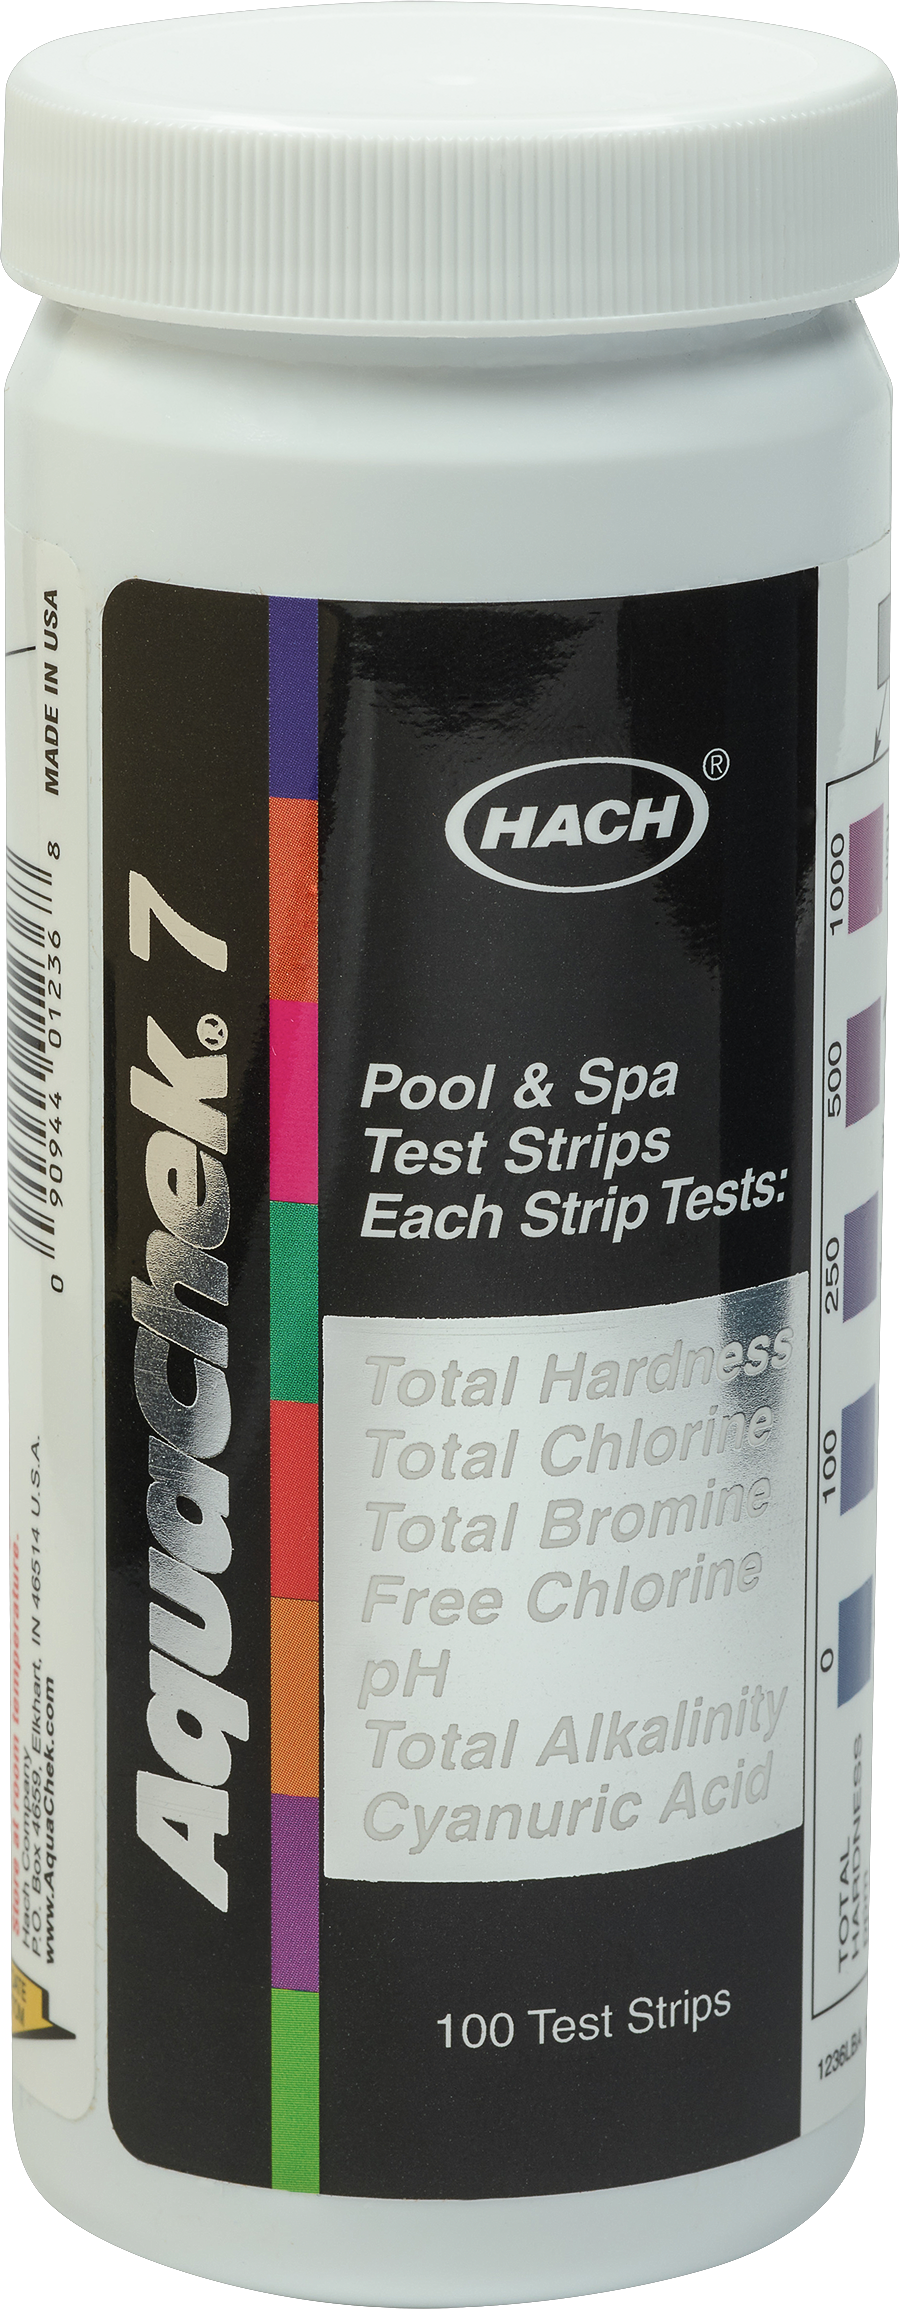 Aquachek 7 In 1 Test Strips-Silver - CLEARANCE SAFETY COVERS